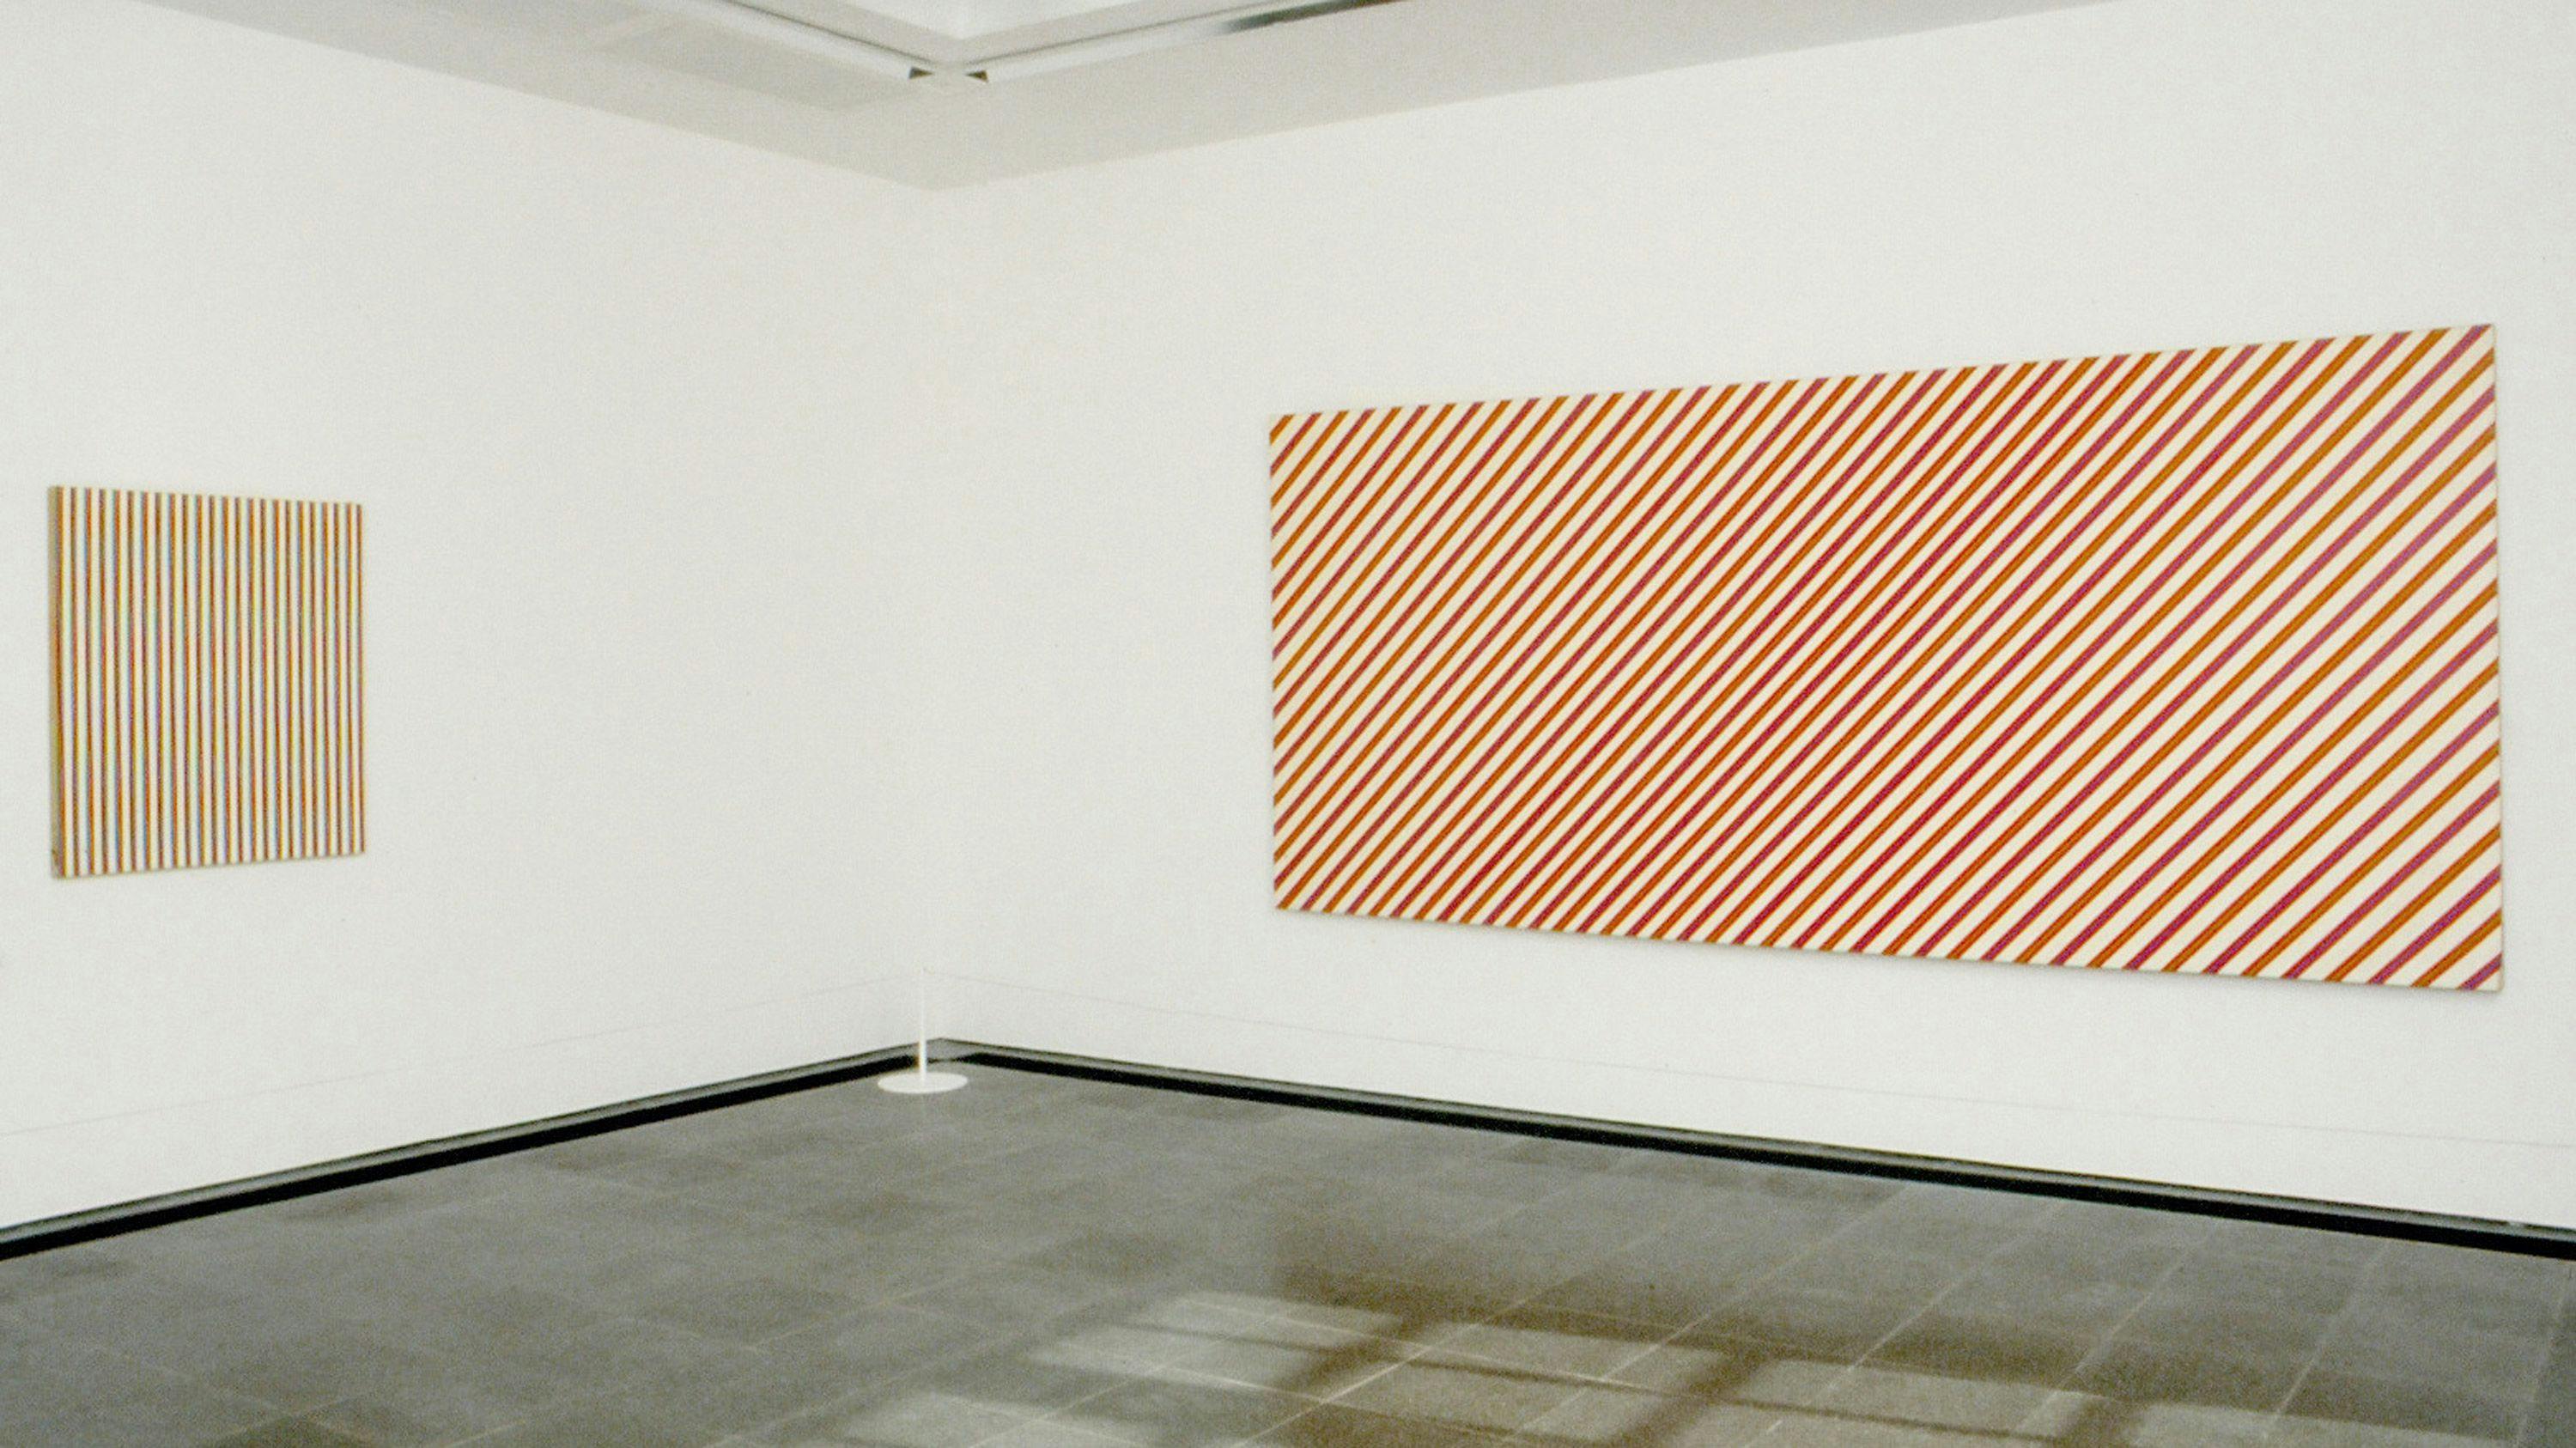 An installation view of the exhibition, Bridget Riley: Paintings from the 1960s and 70s, at Serpentine Gallery in London, dated 1999.